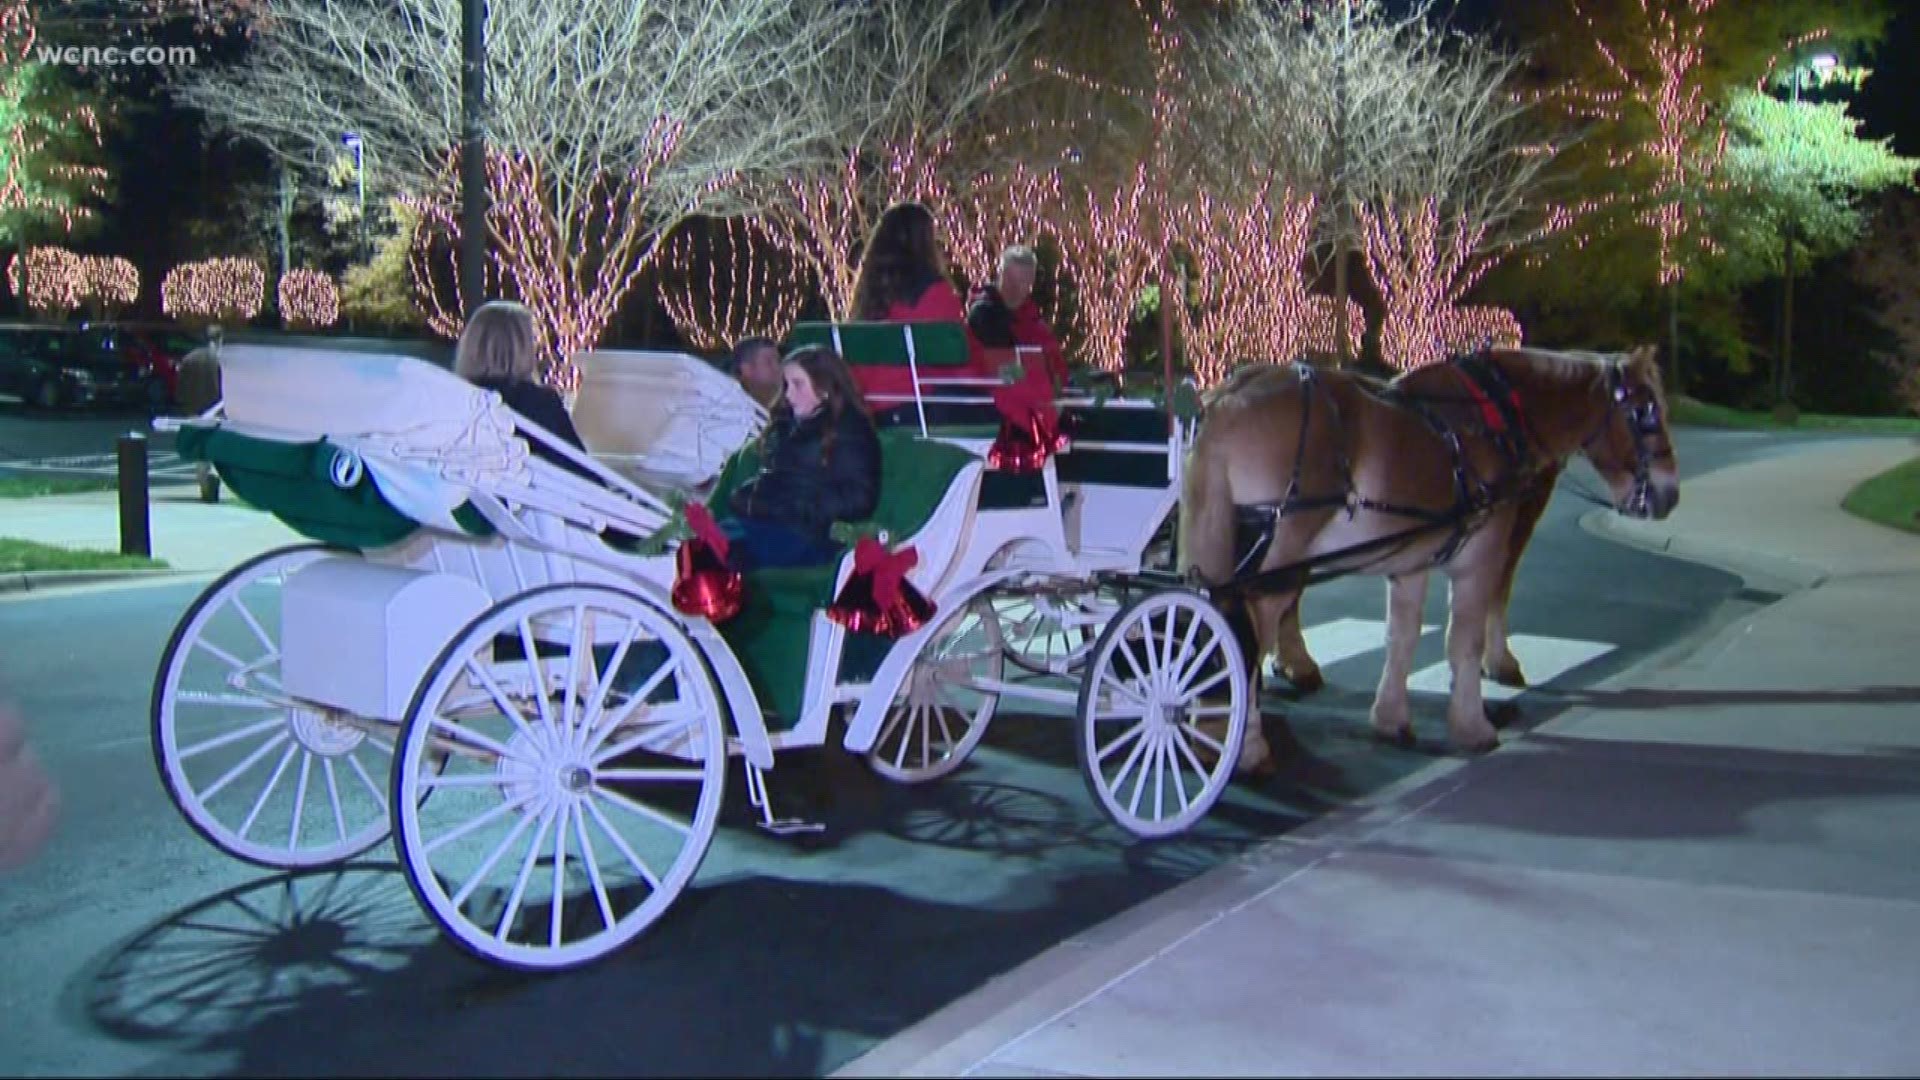 The Billy Graham Library hosts holiday events from November 29 through most of December.